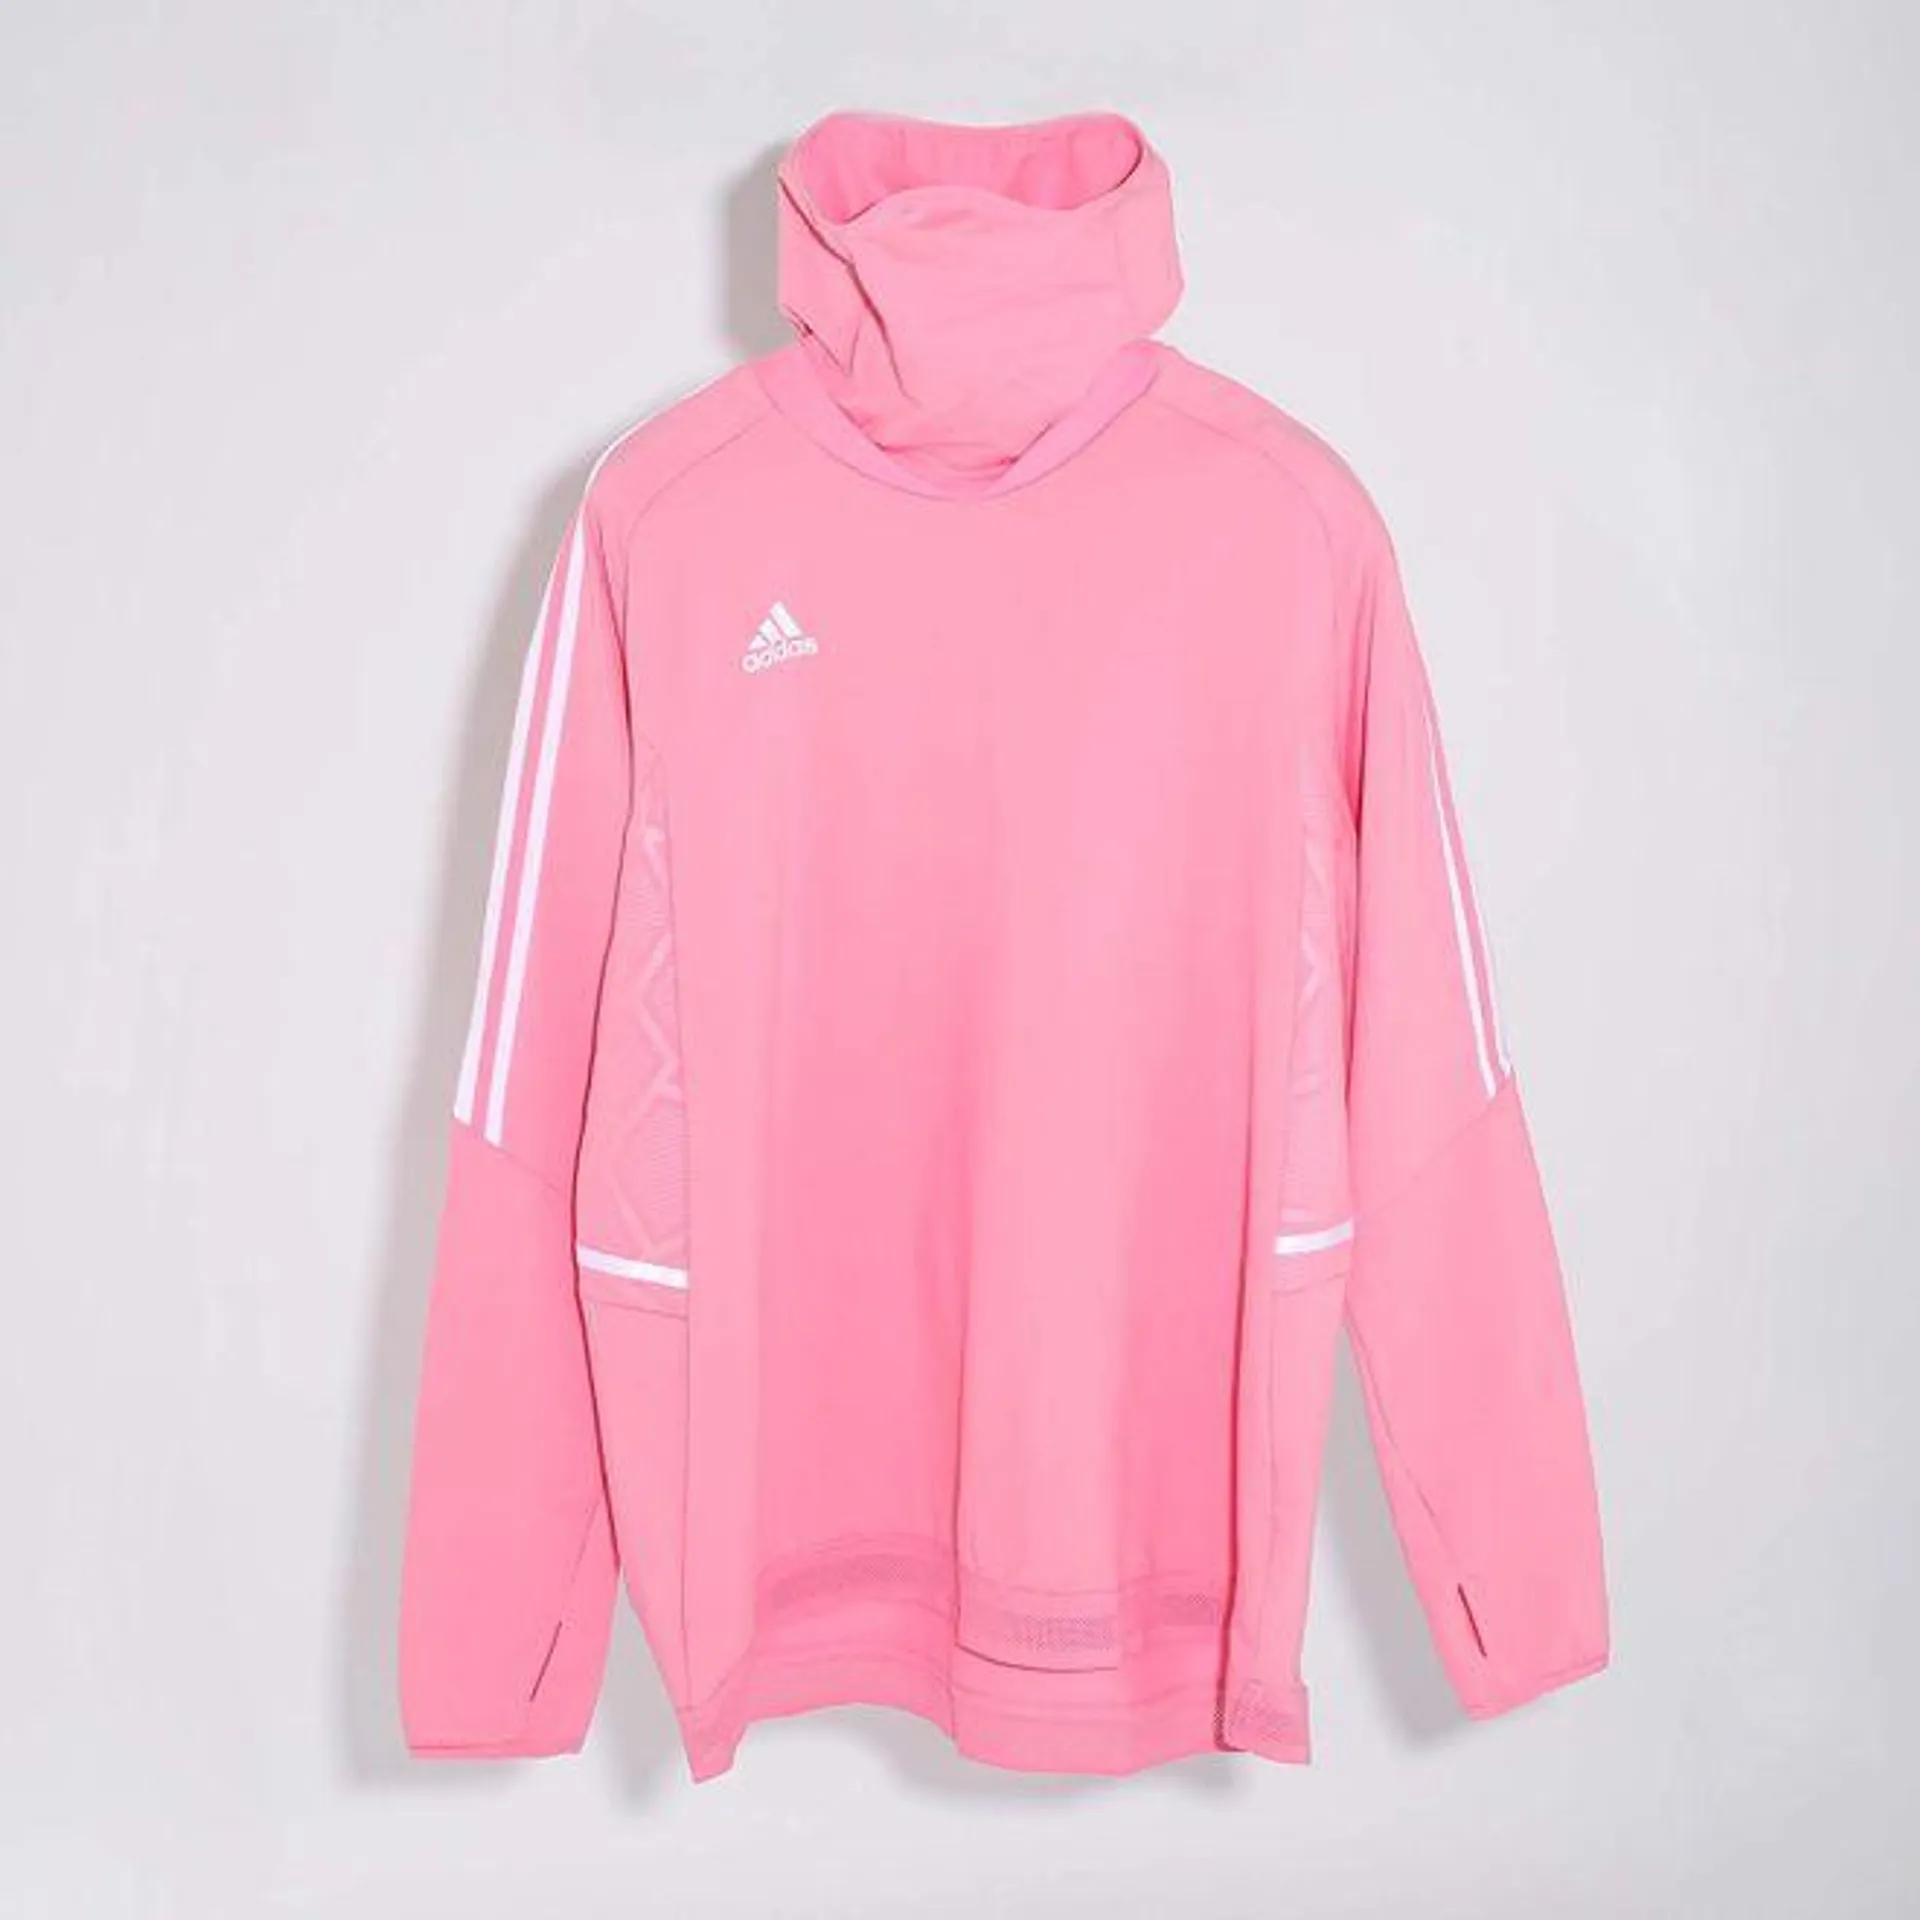 adidas Mens Condivo 22 Pro Training Top in Pink